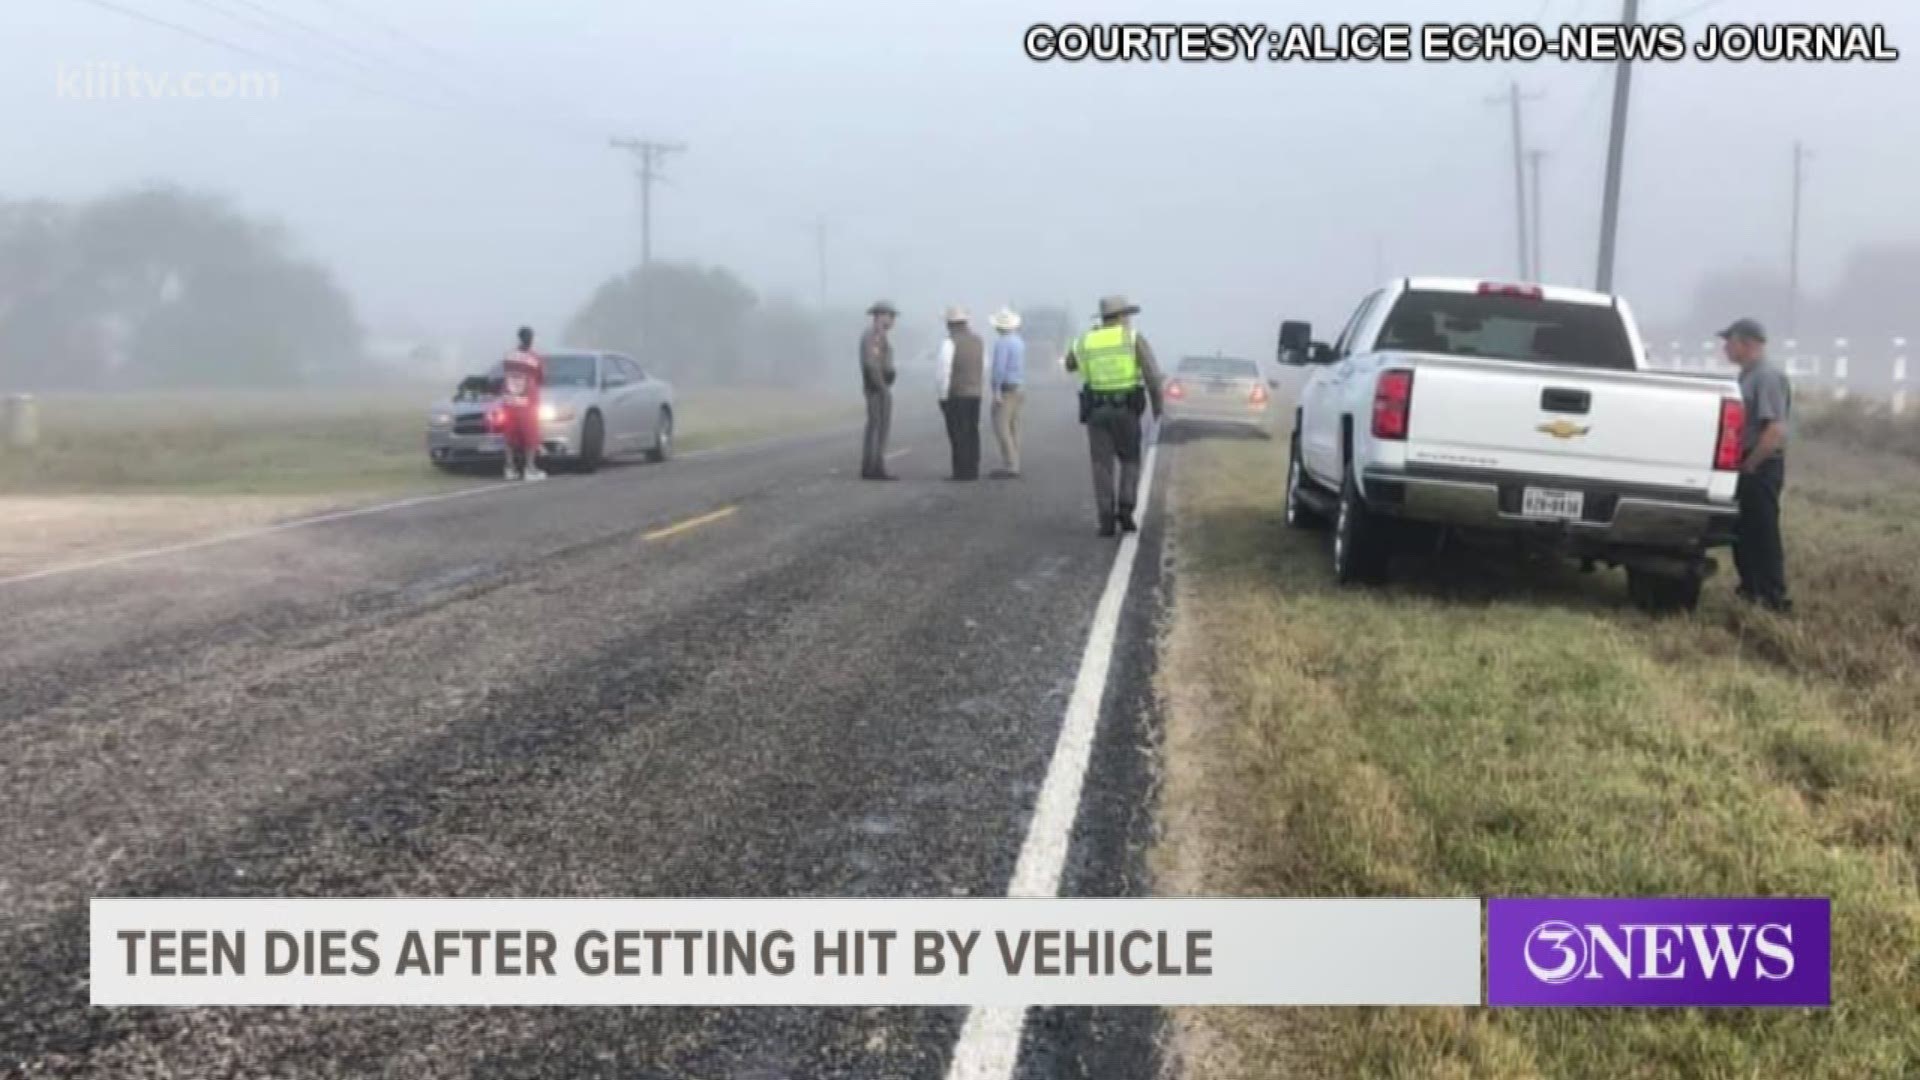 Department of Public Safety troopers are investigating an auto-pedestrian fatal accident that happened Tuesday morning on FM 738 just north of Orange Grove.